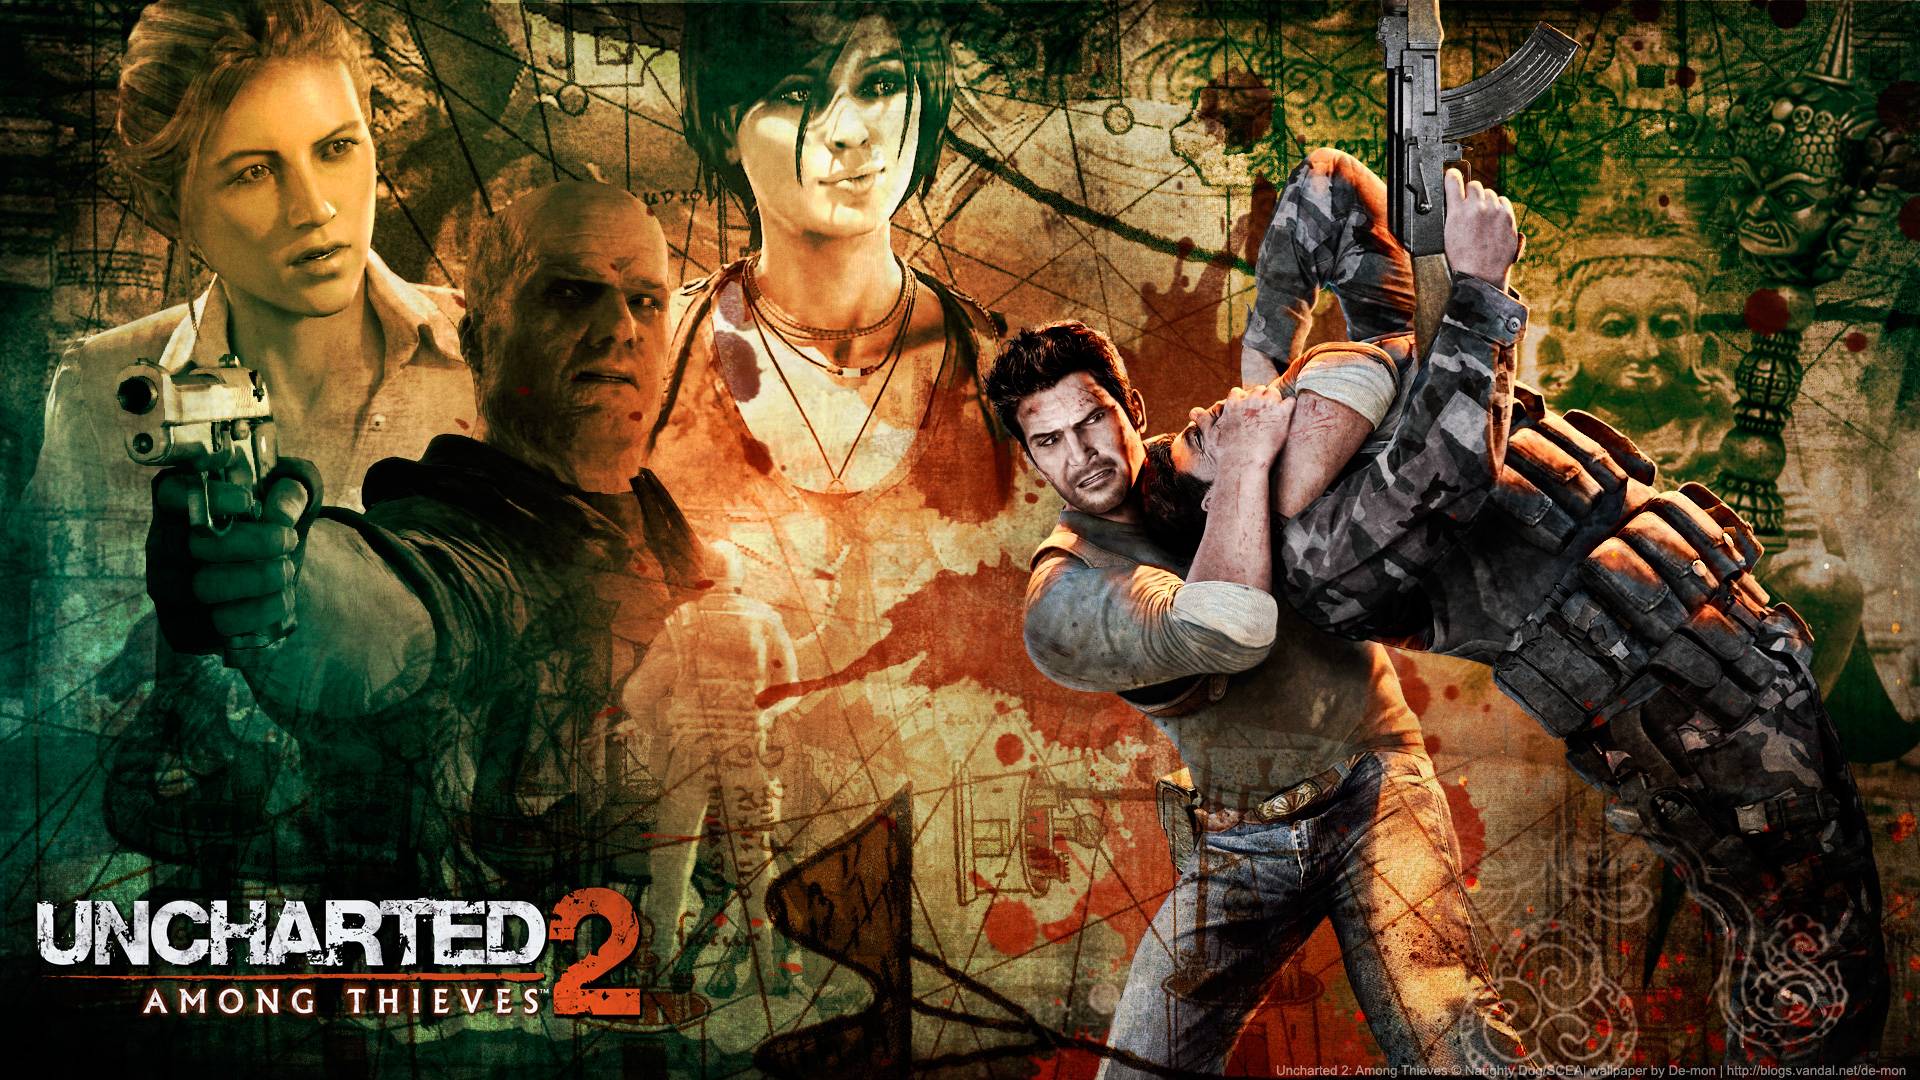 Uncharted 2 Among Thieves Wallpaper - The Galaxy of Gaming